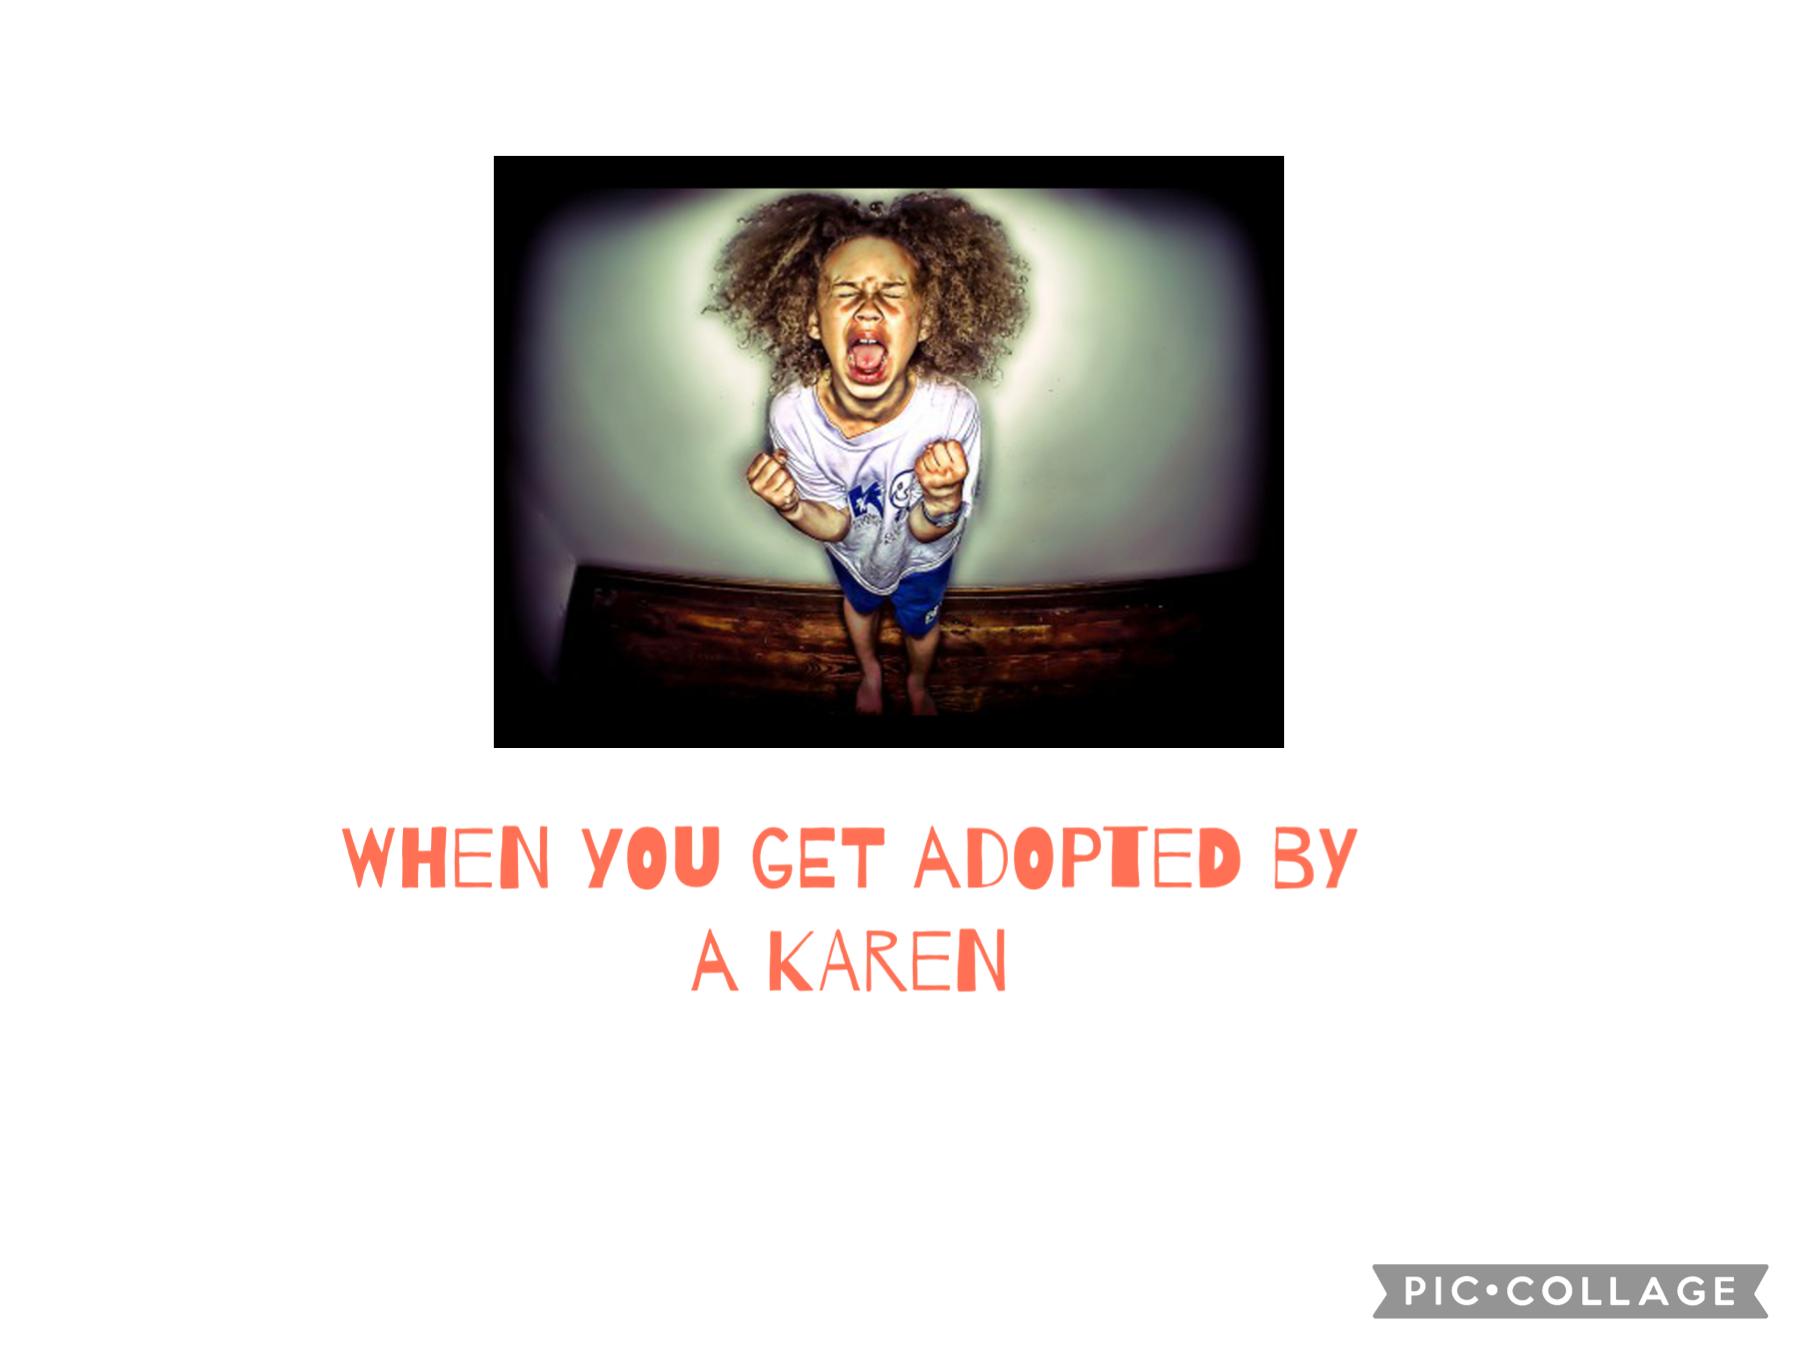 When you get adopted by Karen